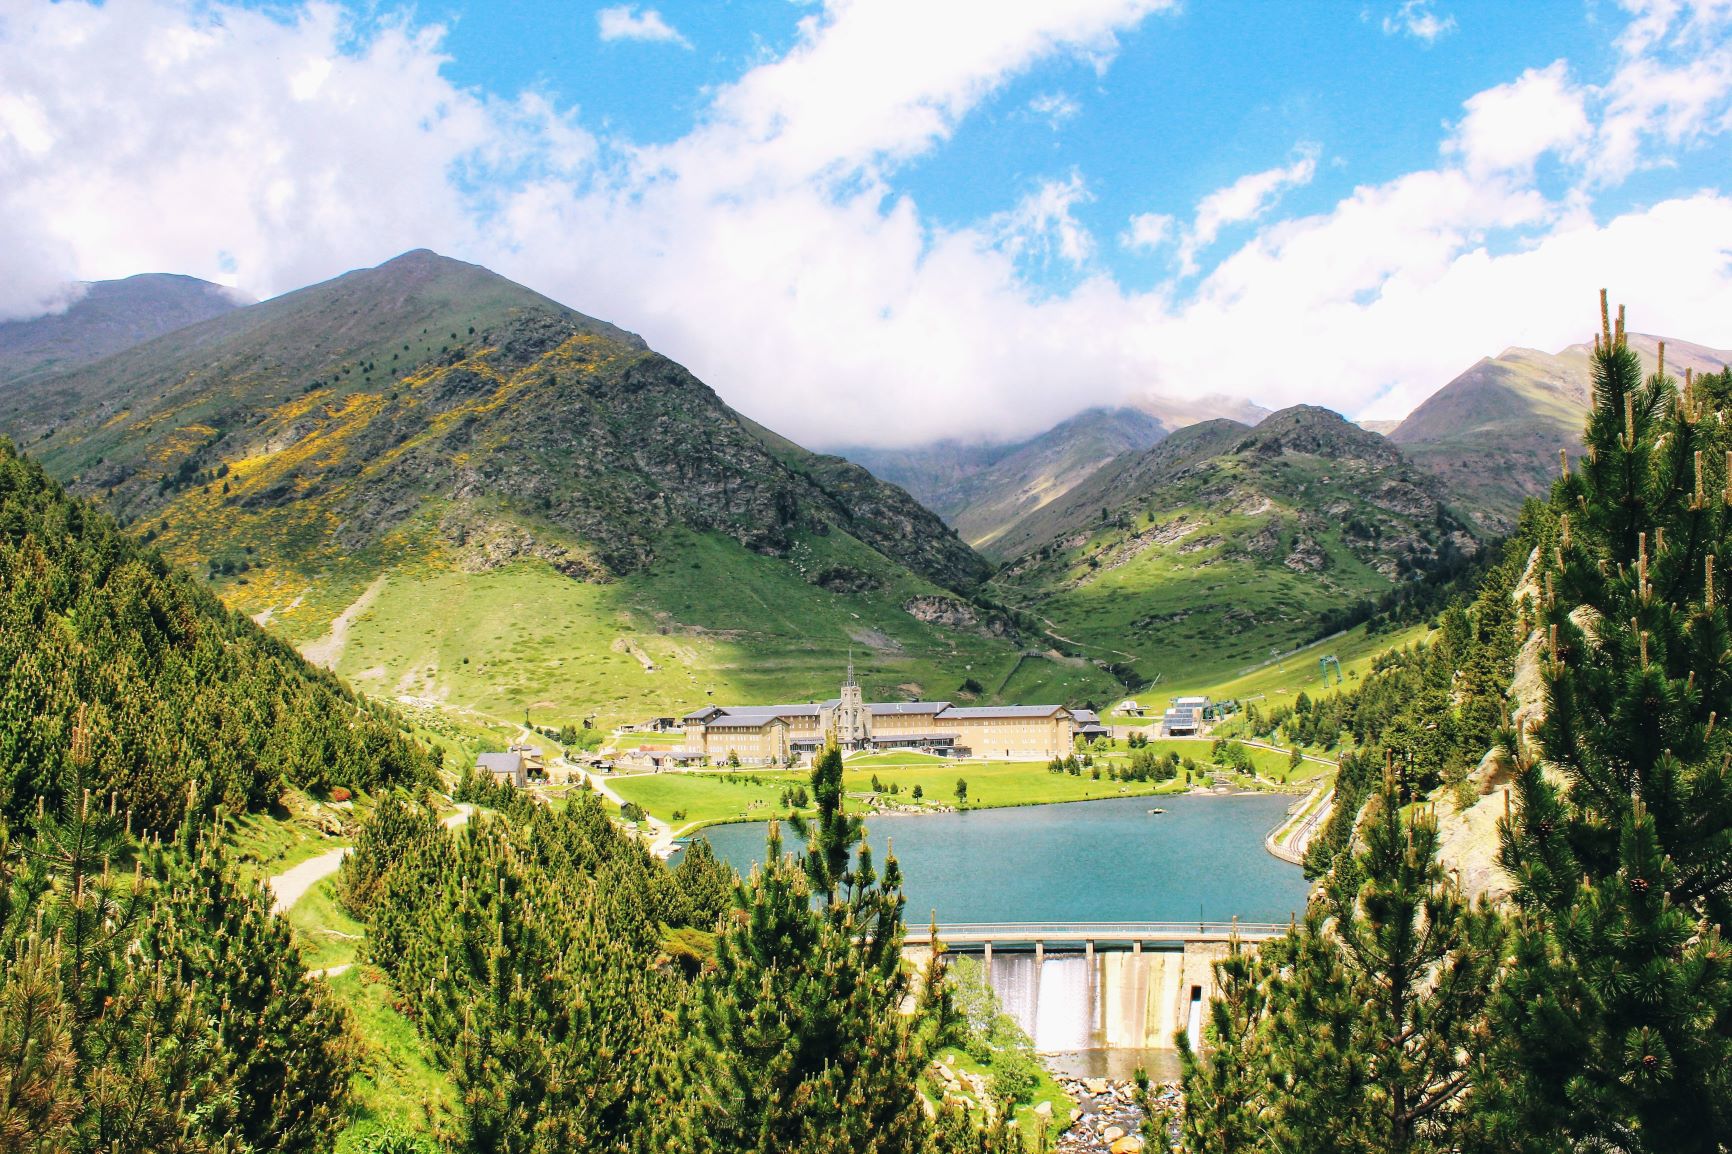 A day trip from Barcelona is great hiking in Vall de Nuria Spain | www.DreamPlanExperience.com